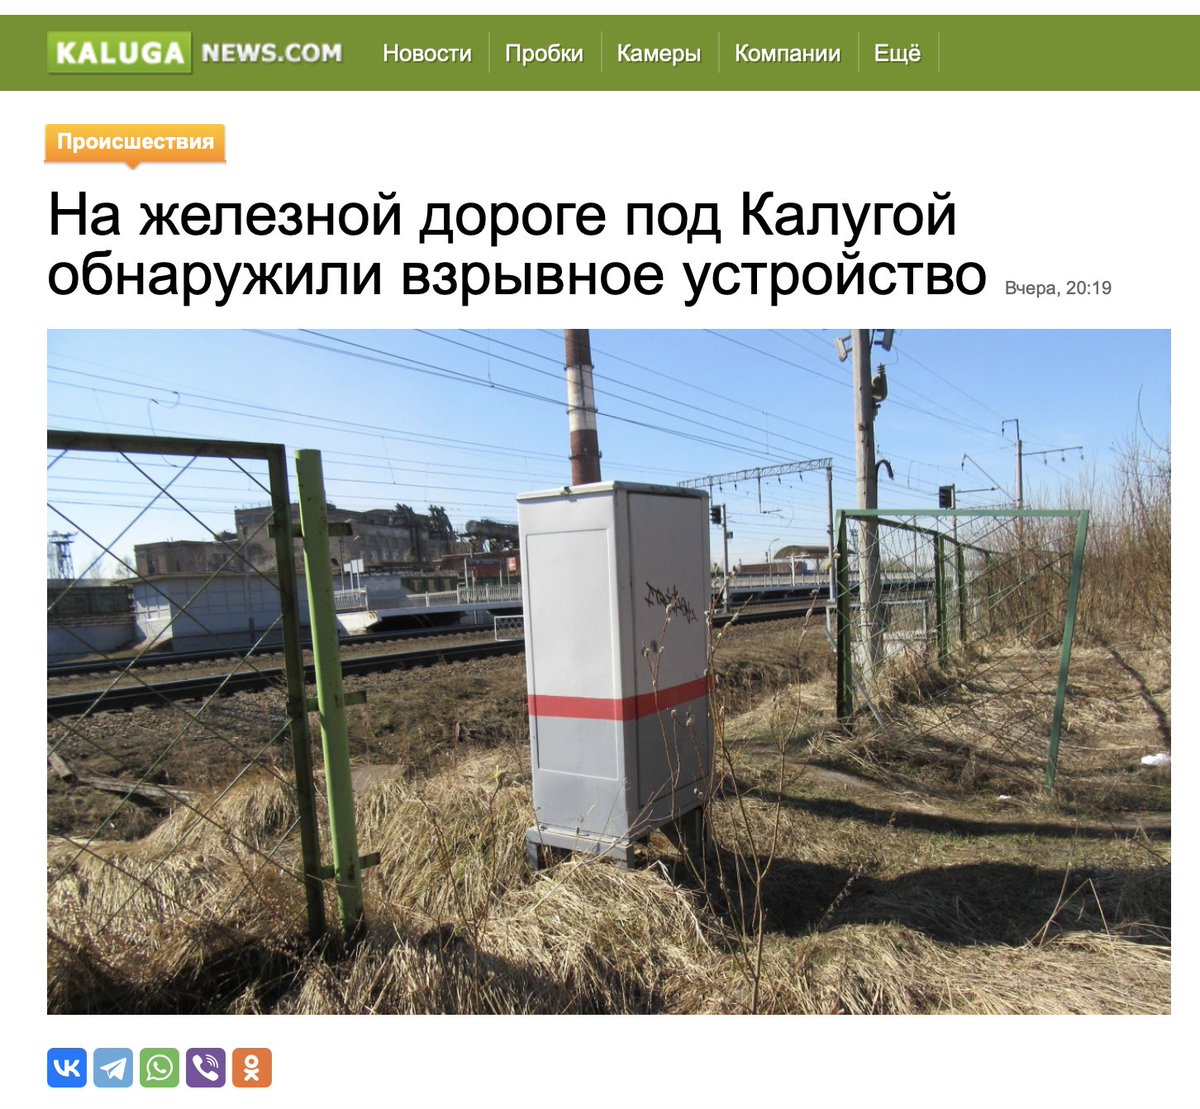 Railways sabotage in Belarus is already so widespread that it's severely undermining supply of a northern Russian Z-army. In Russia it's less common. And yet, that's exactly what's happened yesterday - someone attempted to blow up a relay cabinet with a handmade bomb near Kaluga